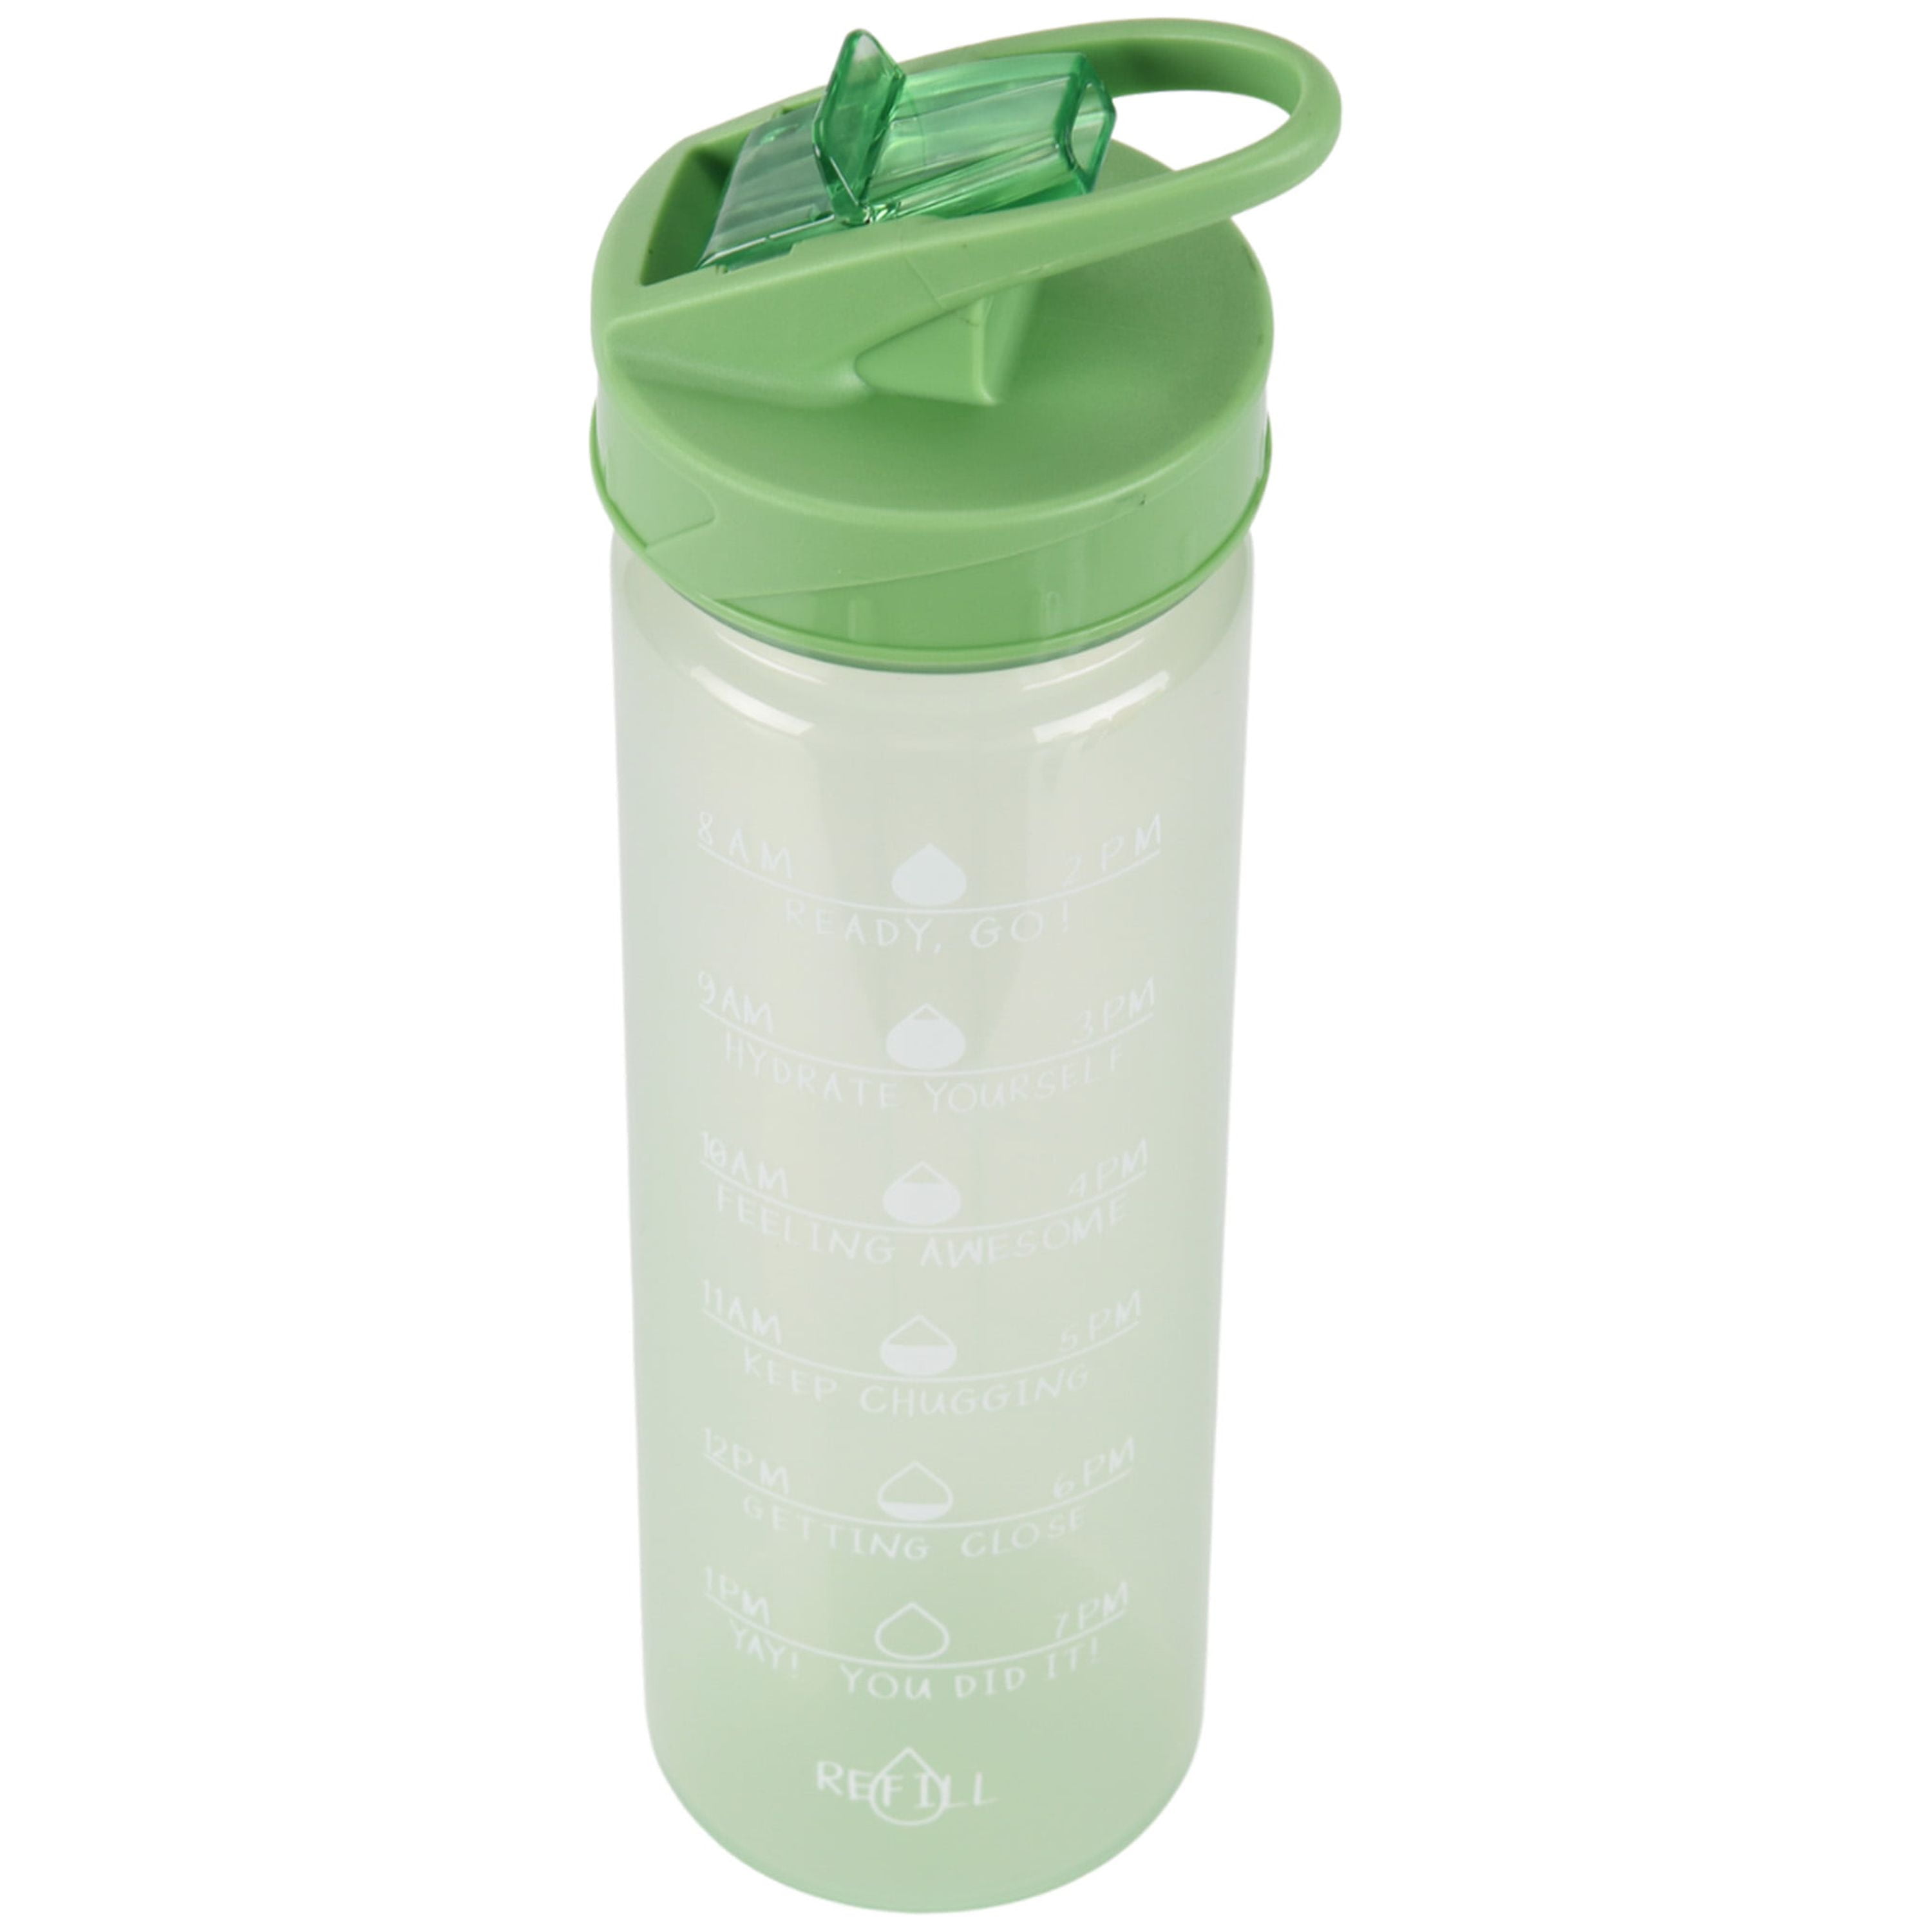 Mainstays 34-Ounce Color Changing Plastic Shaker Bottle, Melon Juice, NEW!!